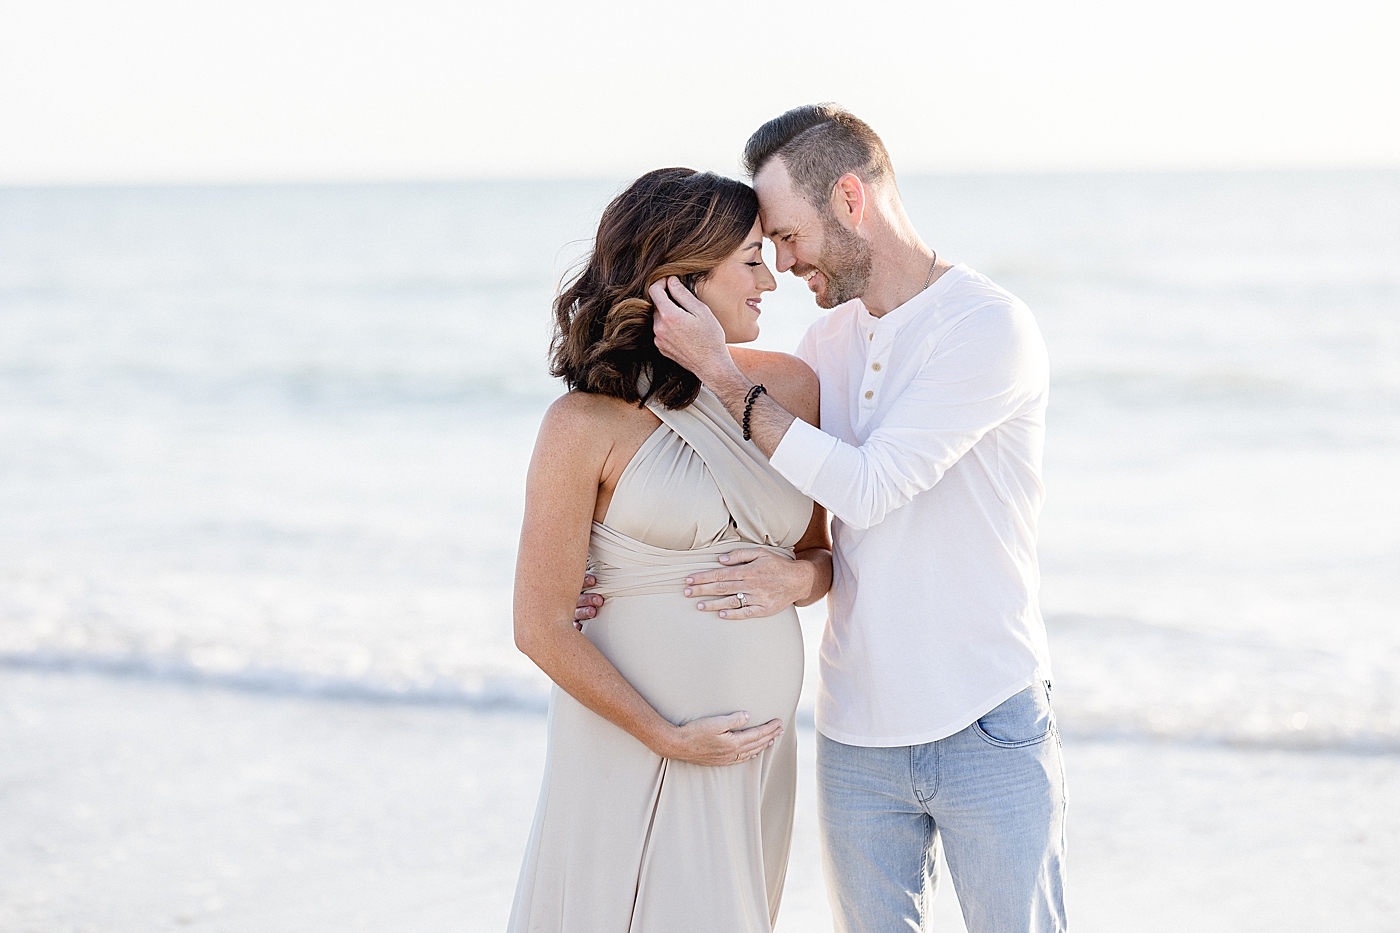 Mom and Dad looking at each other during maternity session. Photo by Brittany Elise Photography.